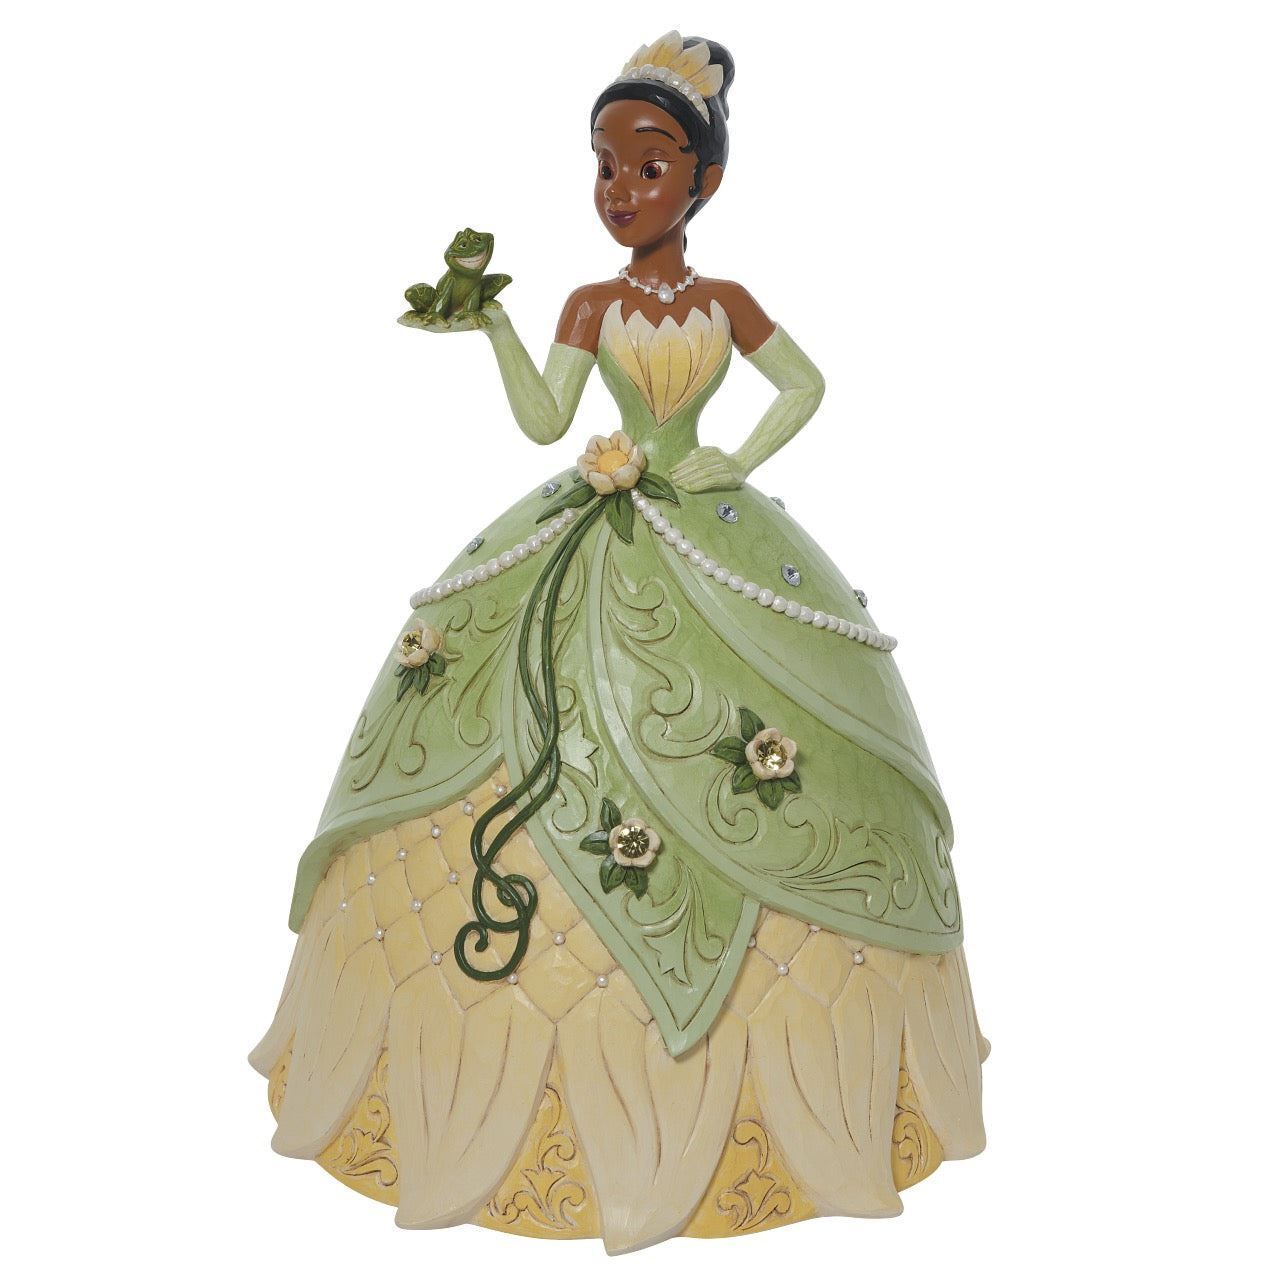 Jim Shore Disney Traditions Tiana Deluxe 4th in Series Figurine 6011921